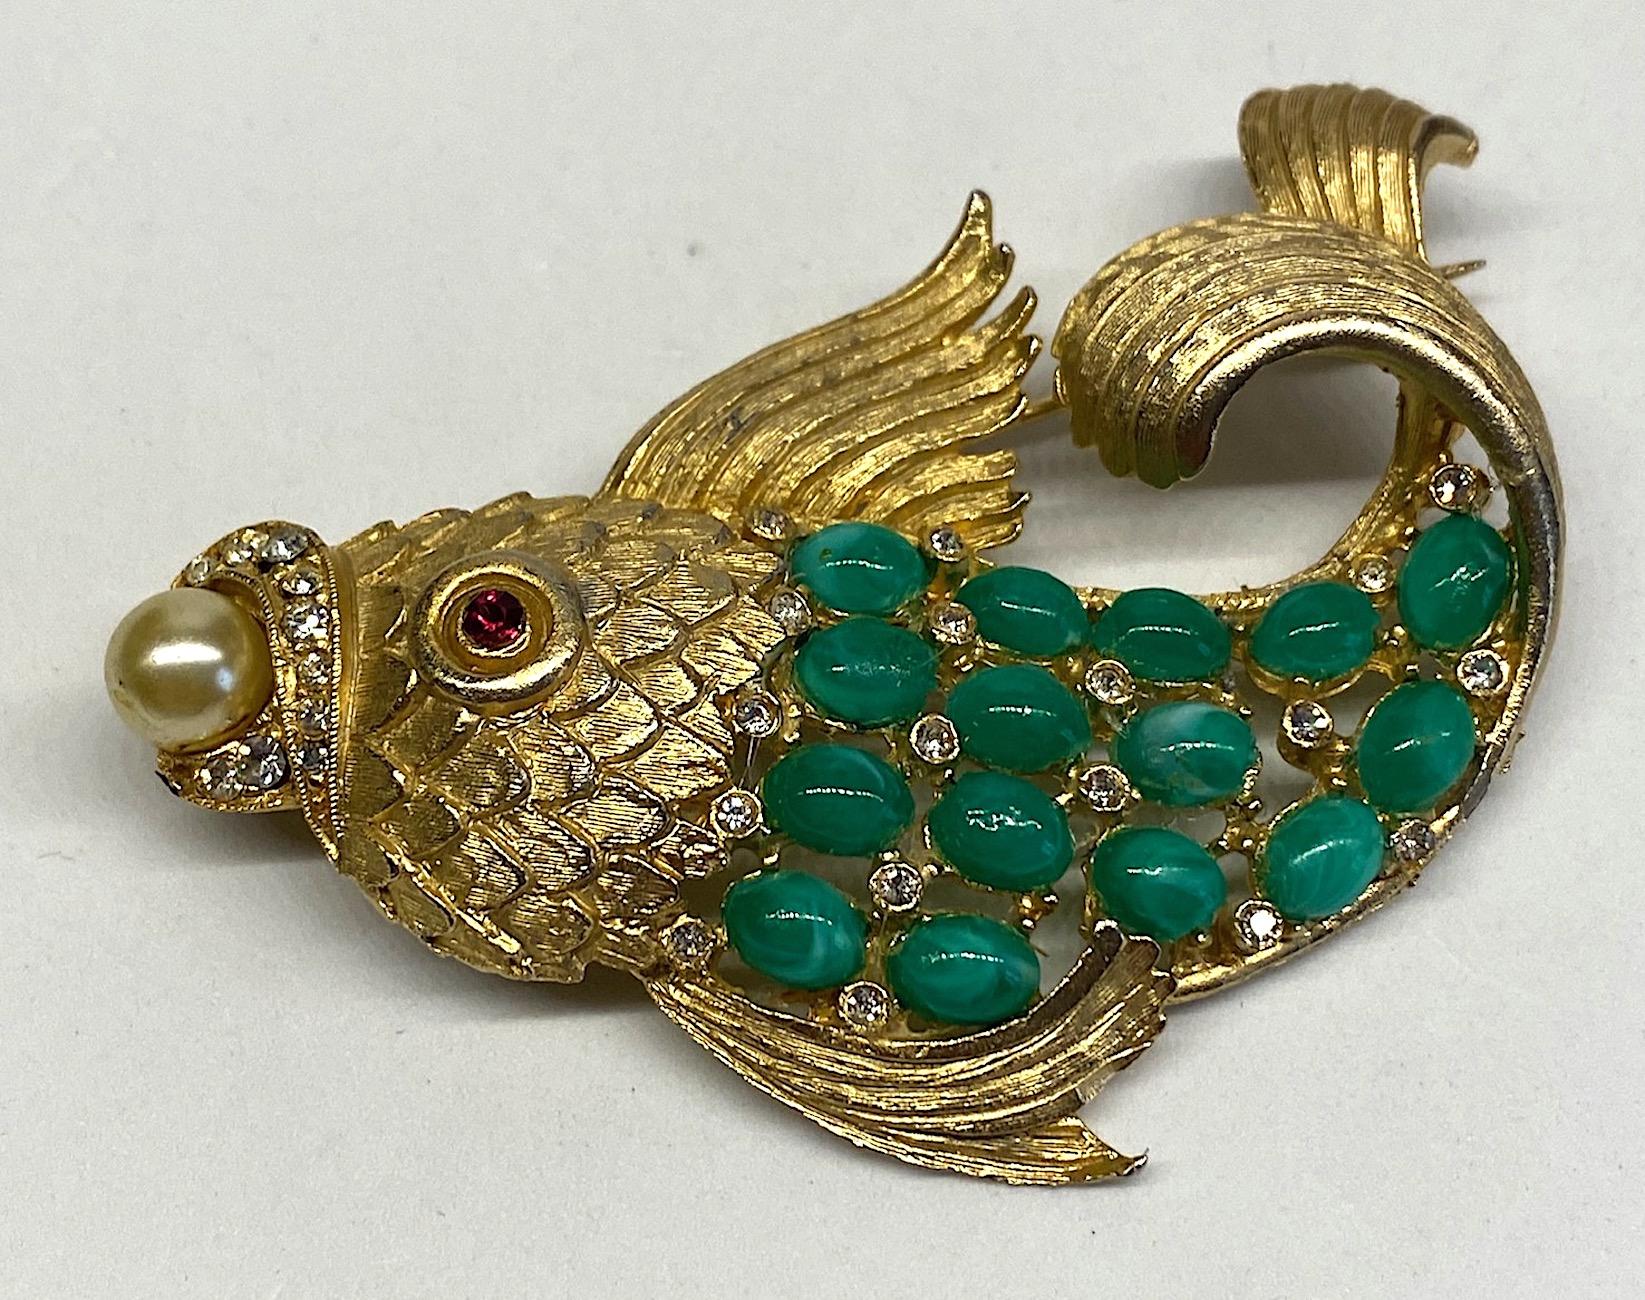 1950s Satin Gold Figural Brooch of Fish with Green Cabochon 1